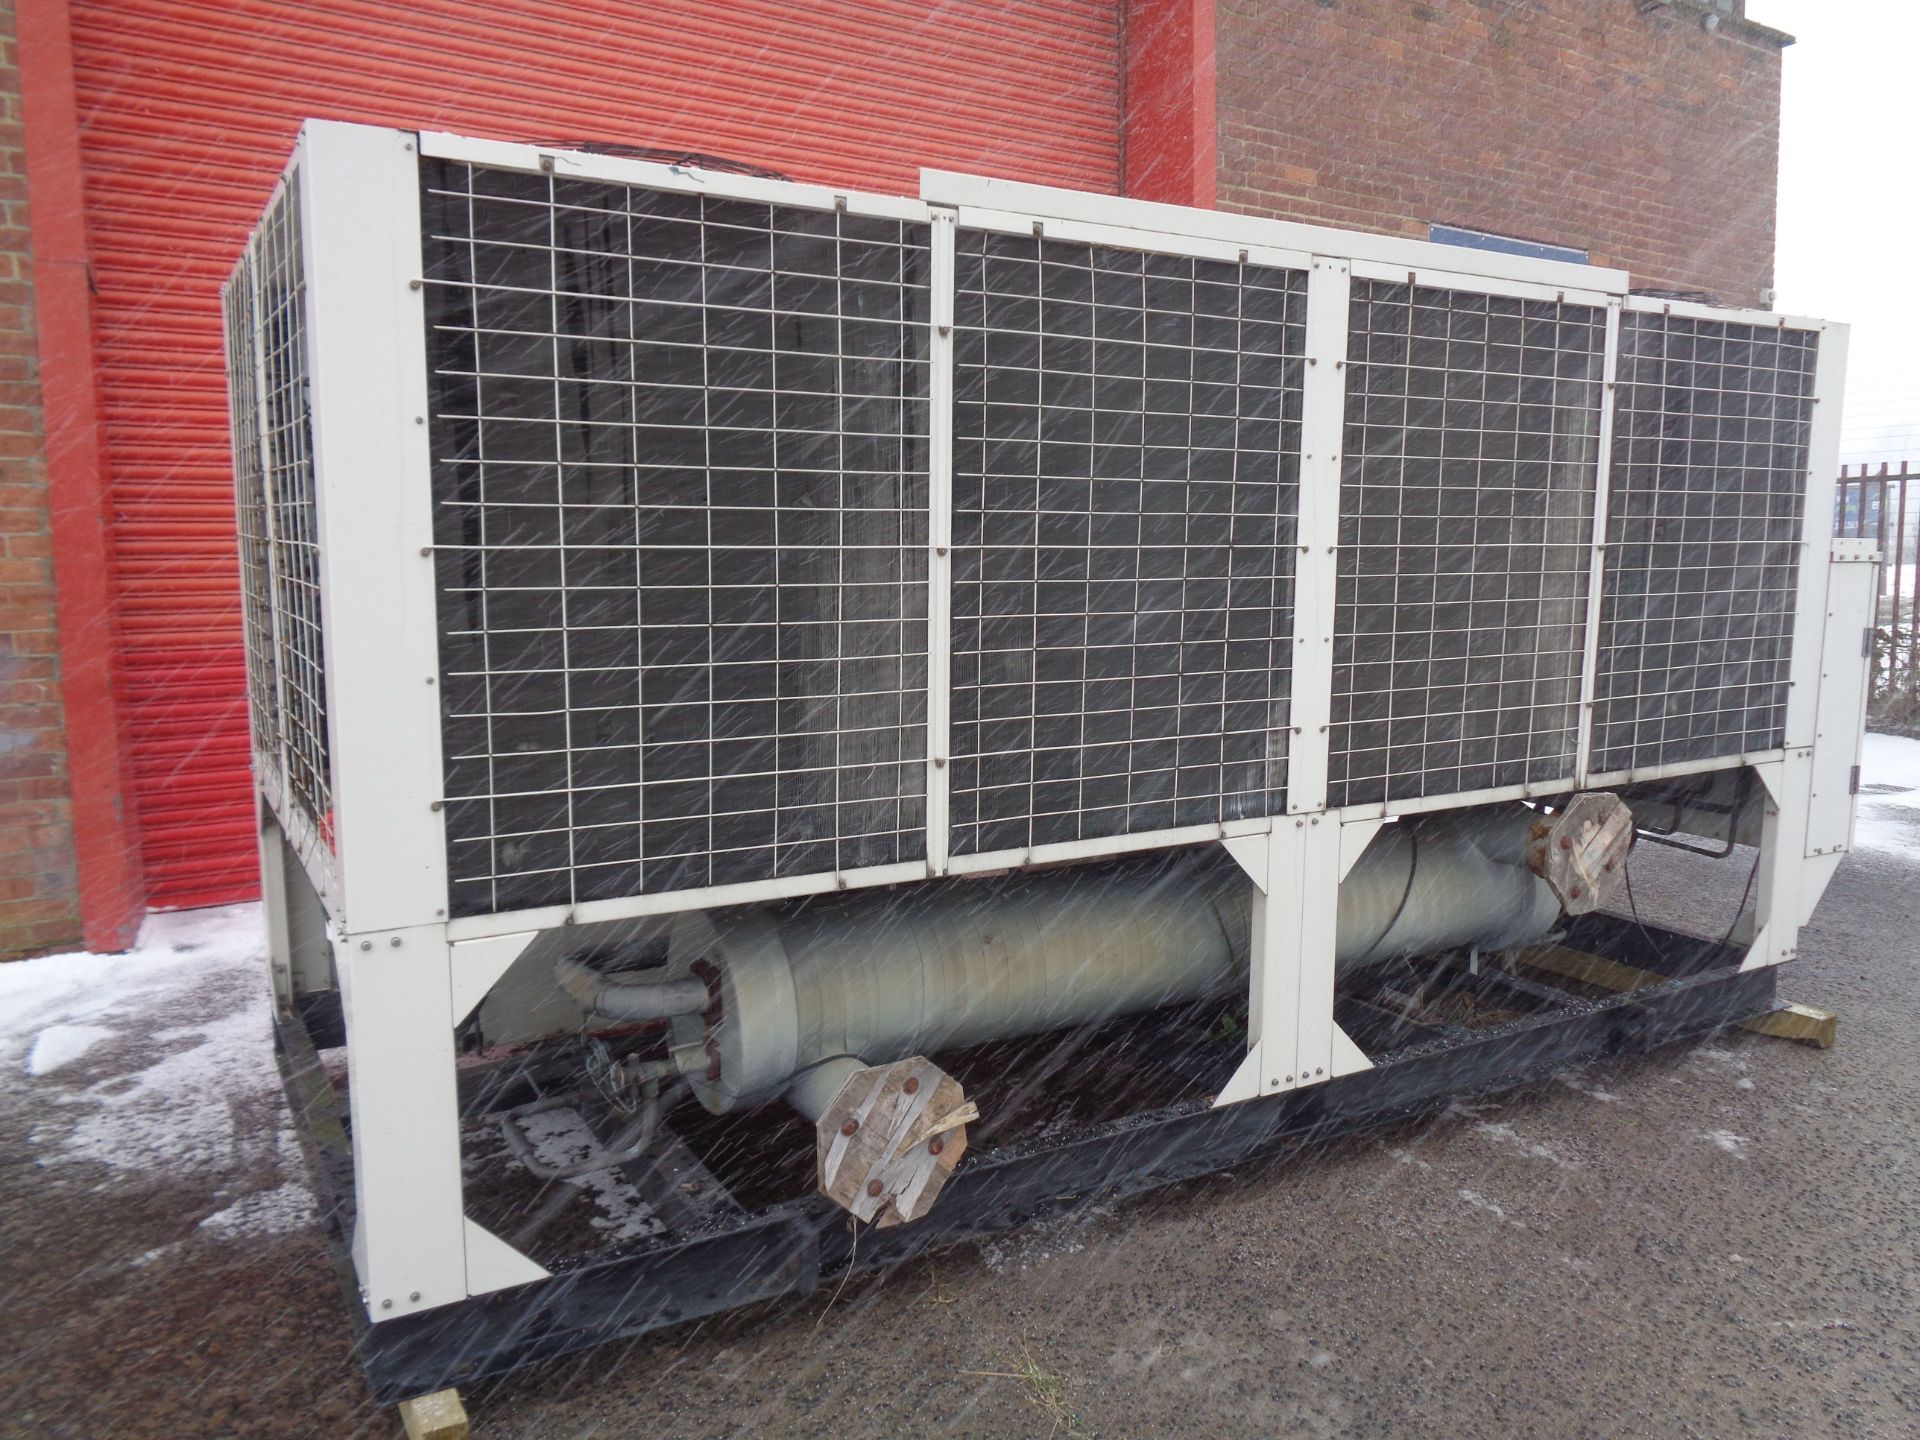 Hitachi ""H Series"" air cooled chiller model RCUG 150AHYZ1. 103 tons. New 2011. Chiller utilizes